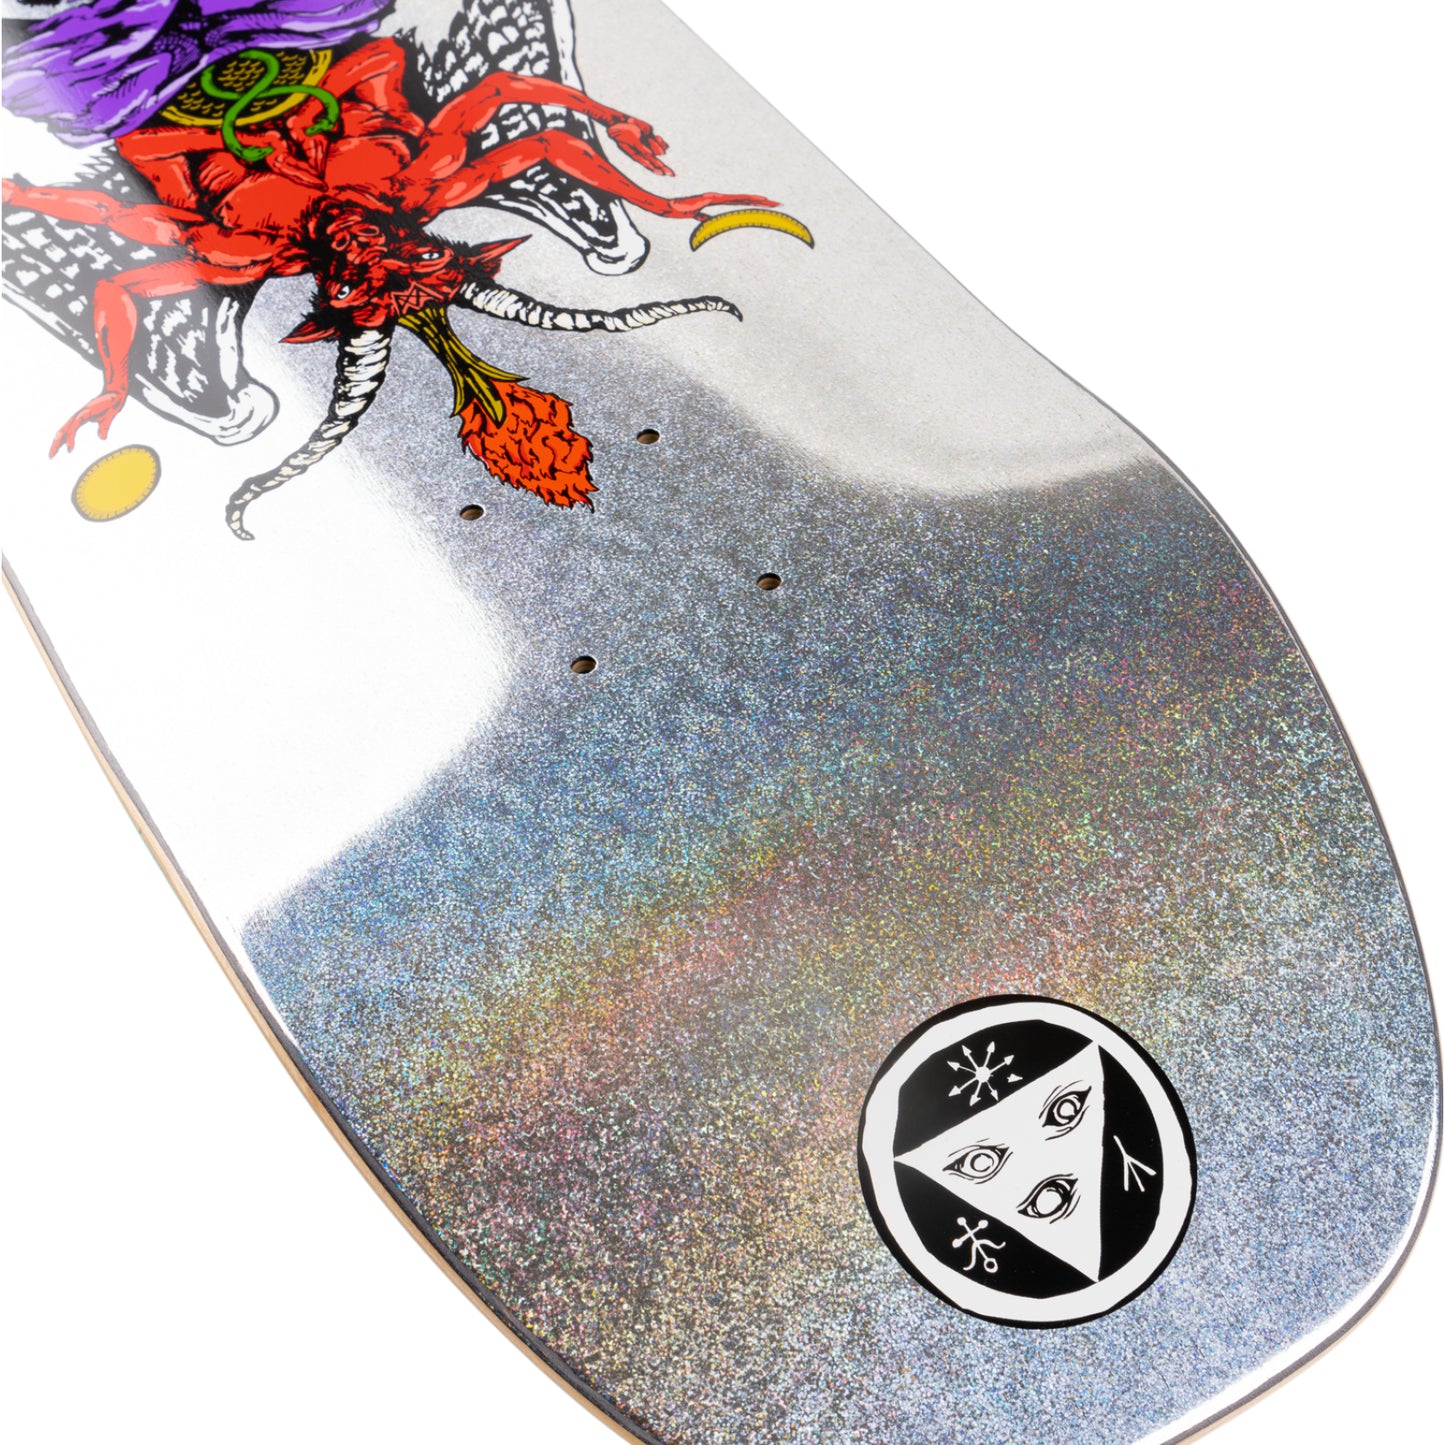 WELCOME Ryan Lay Bapholit on Stonecipher Deck 8.6" Prism